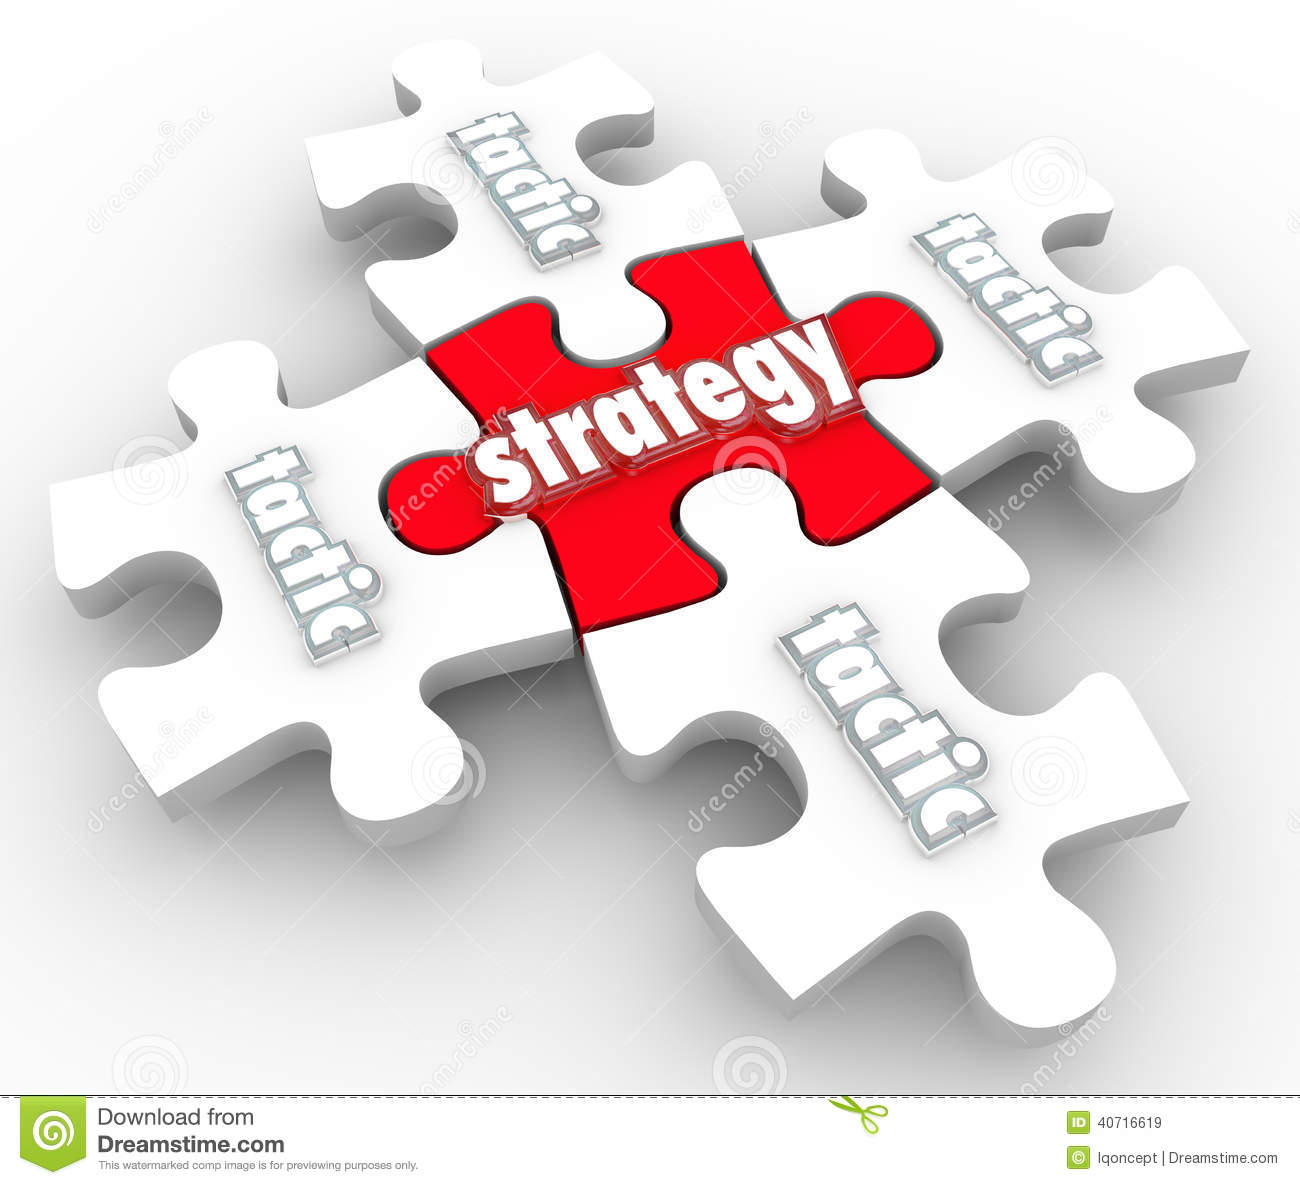 business strategy clipart - photo #24